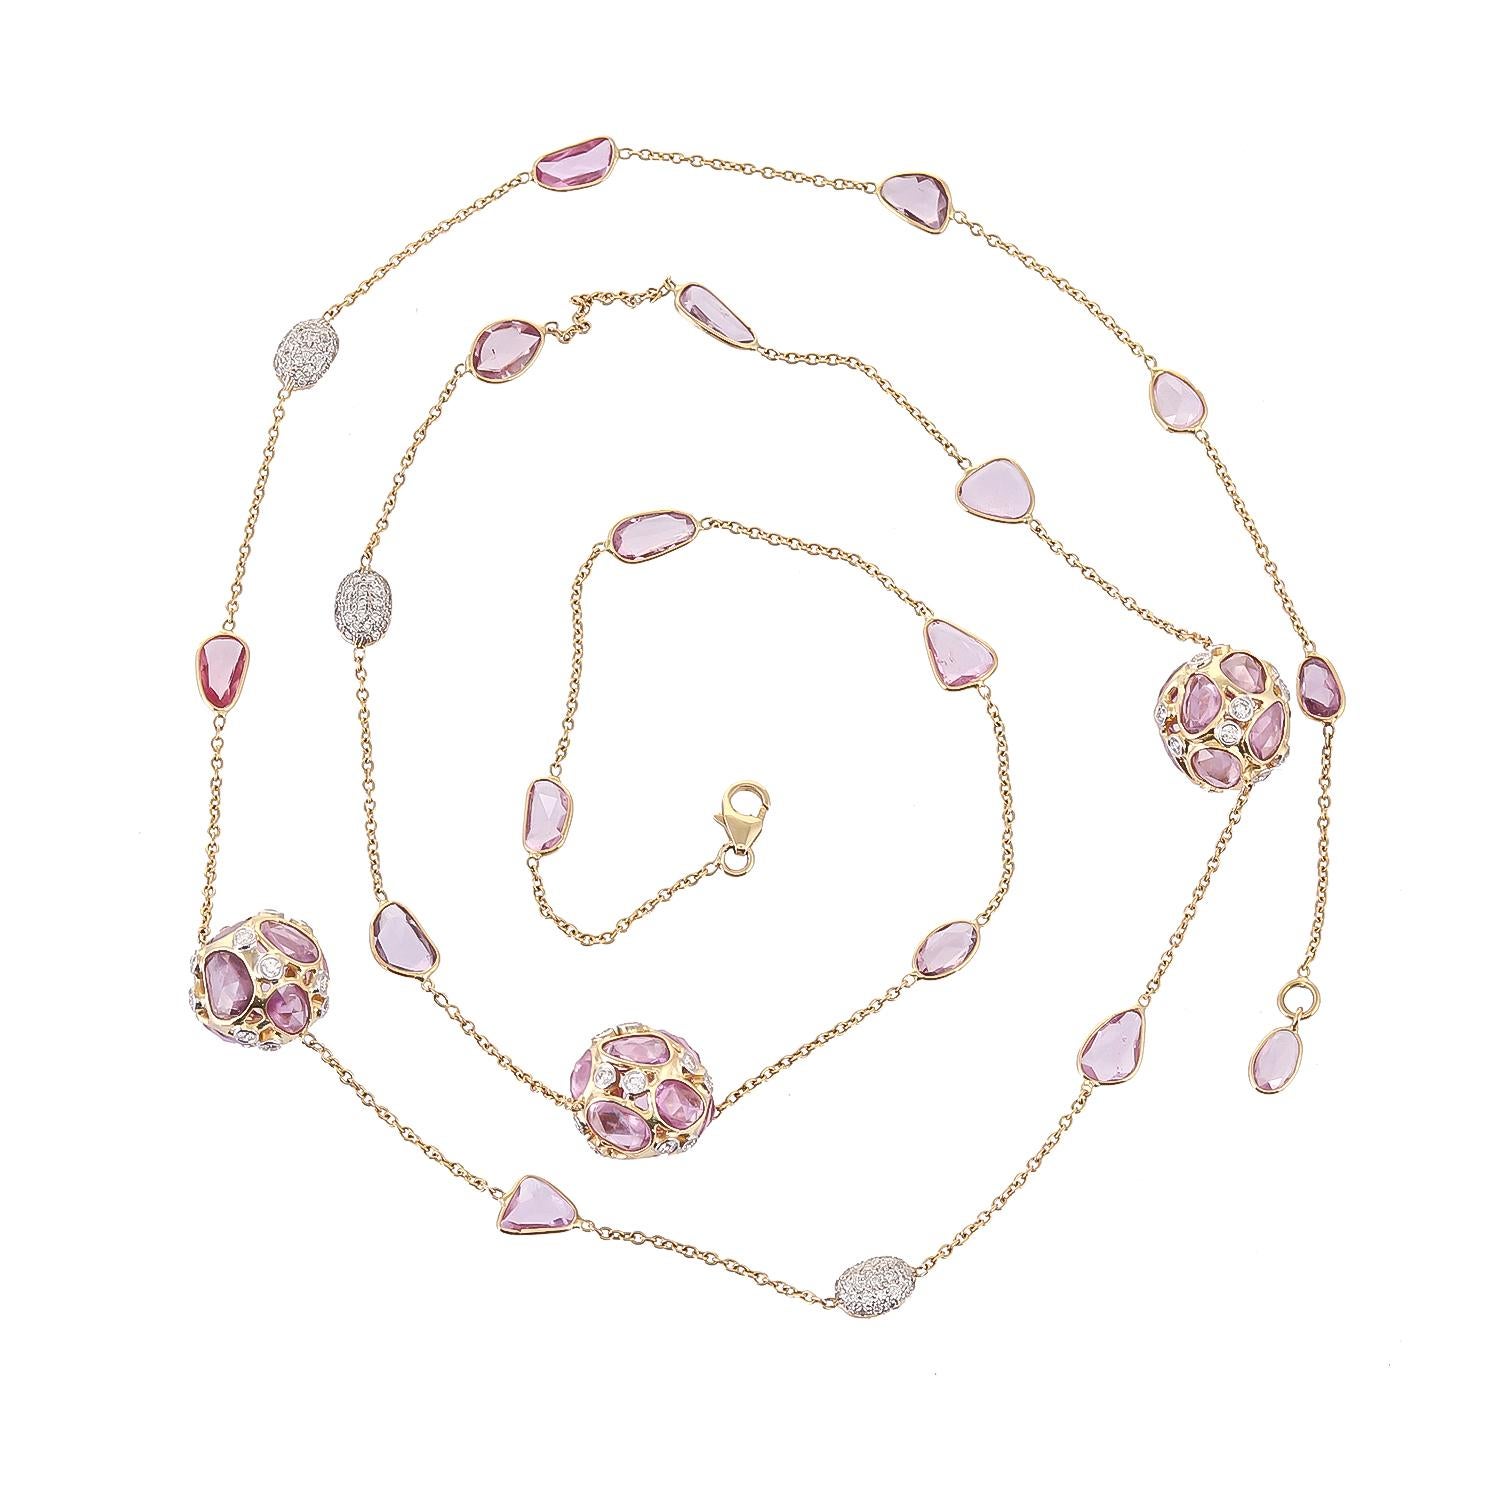 This 18 karats yellow gold chain features irregular shaped 28.82 carats pink sapphires rose cuts which are set to form a round ball with sprinkled 1.87 carats diamonds. Modern and Subtle.
Art of gifting: the Jewel is presented with 'Exquisite Fine